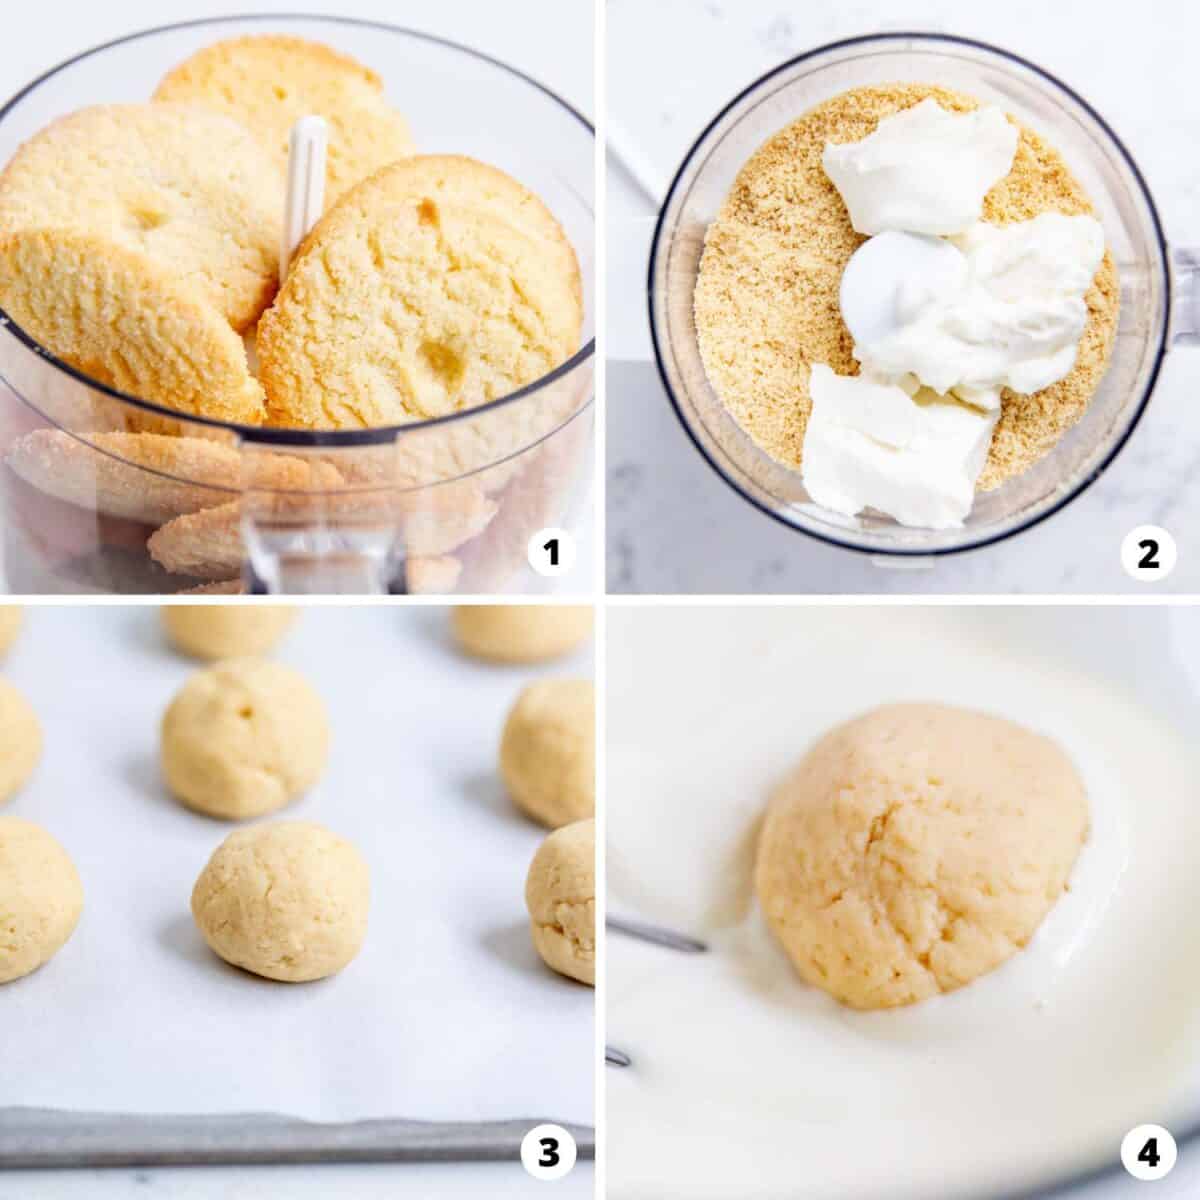 Showing how to make sugar cookie truffles in a 4 step collage.